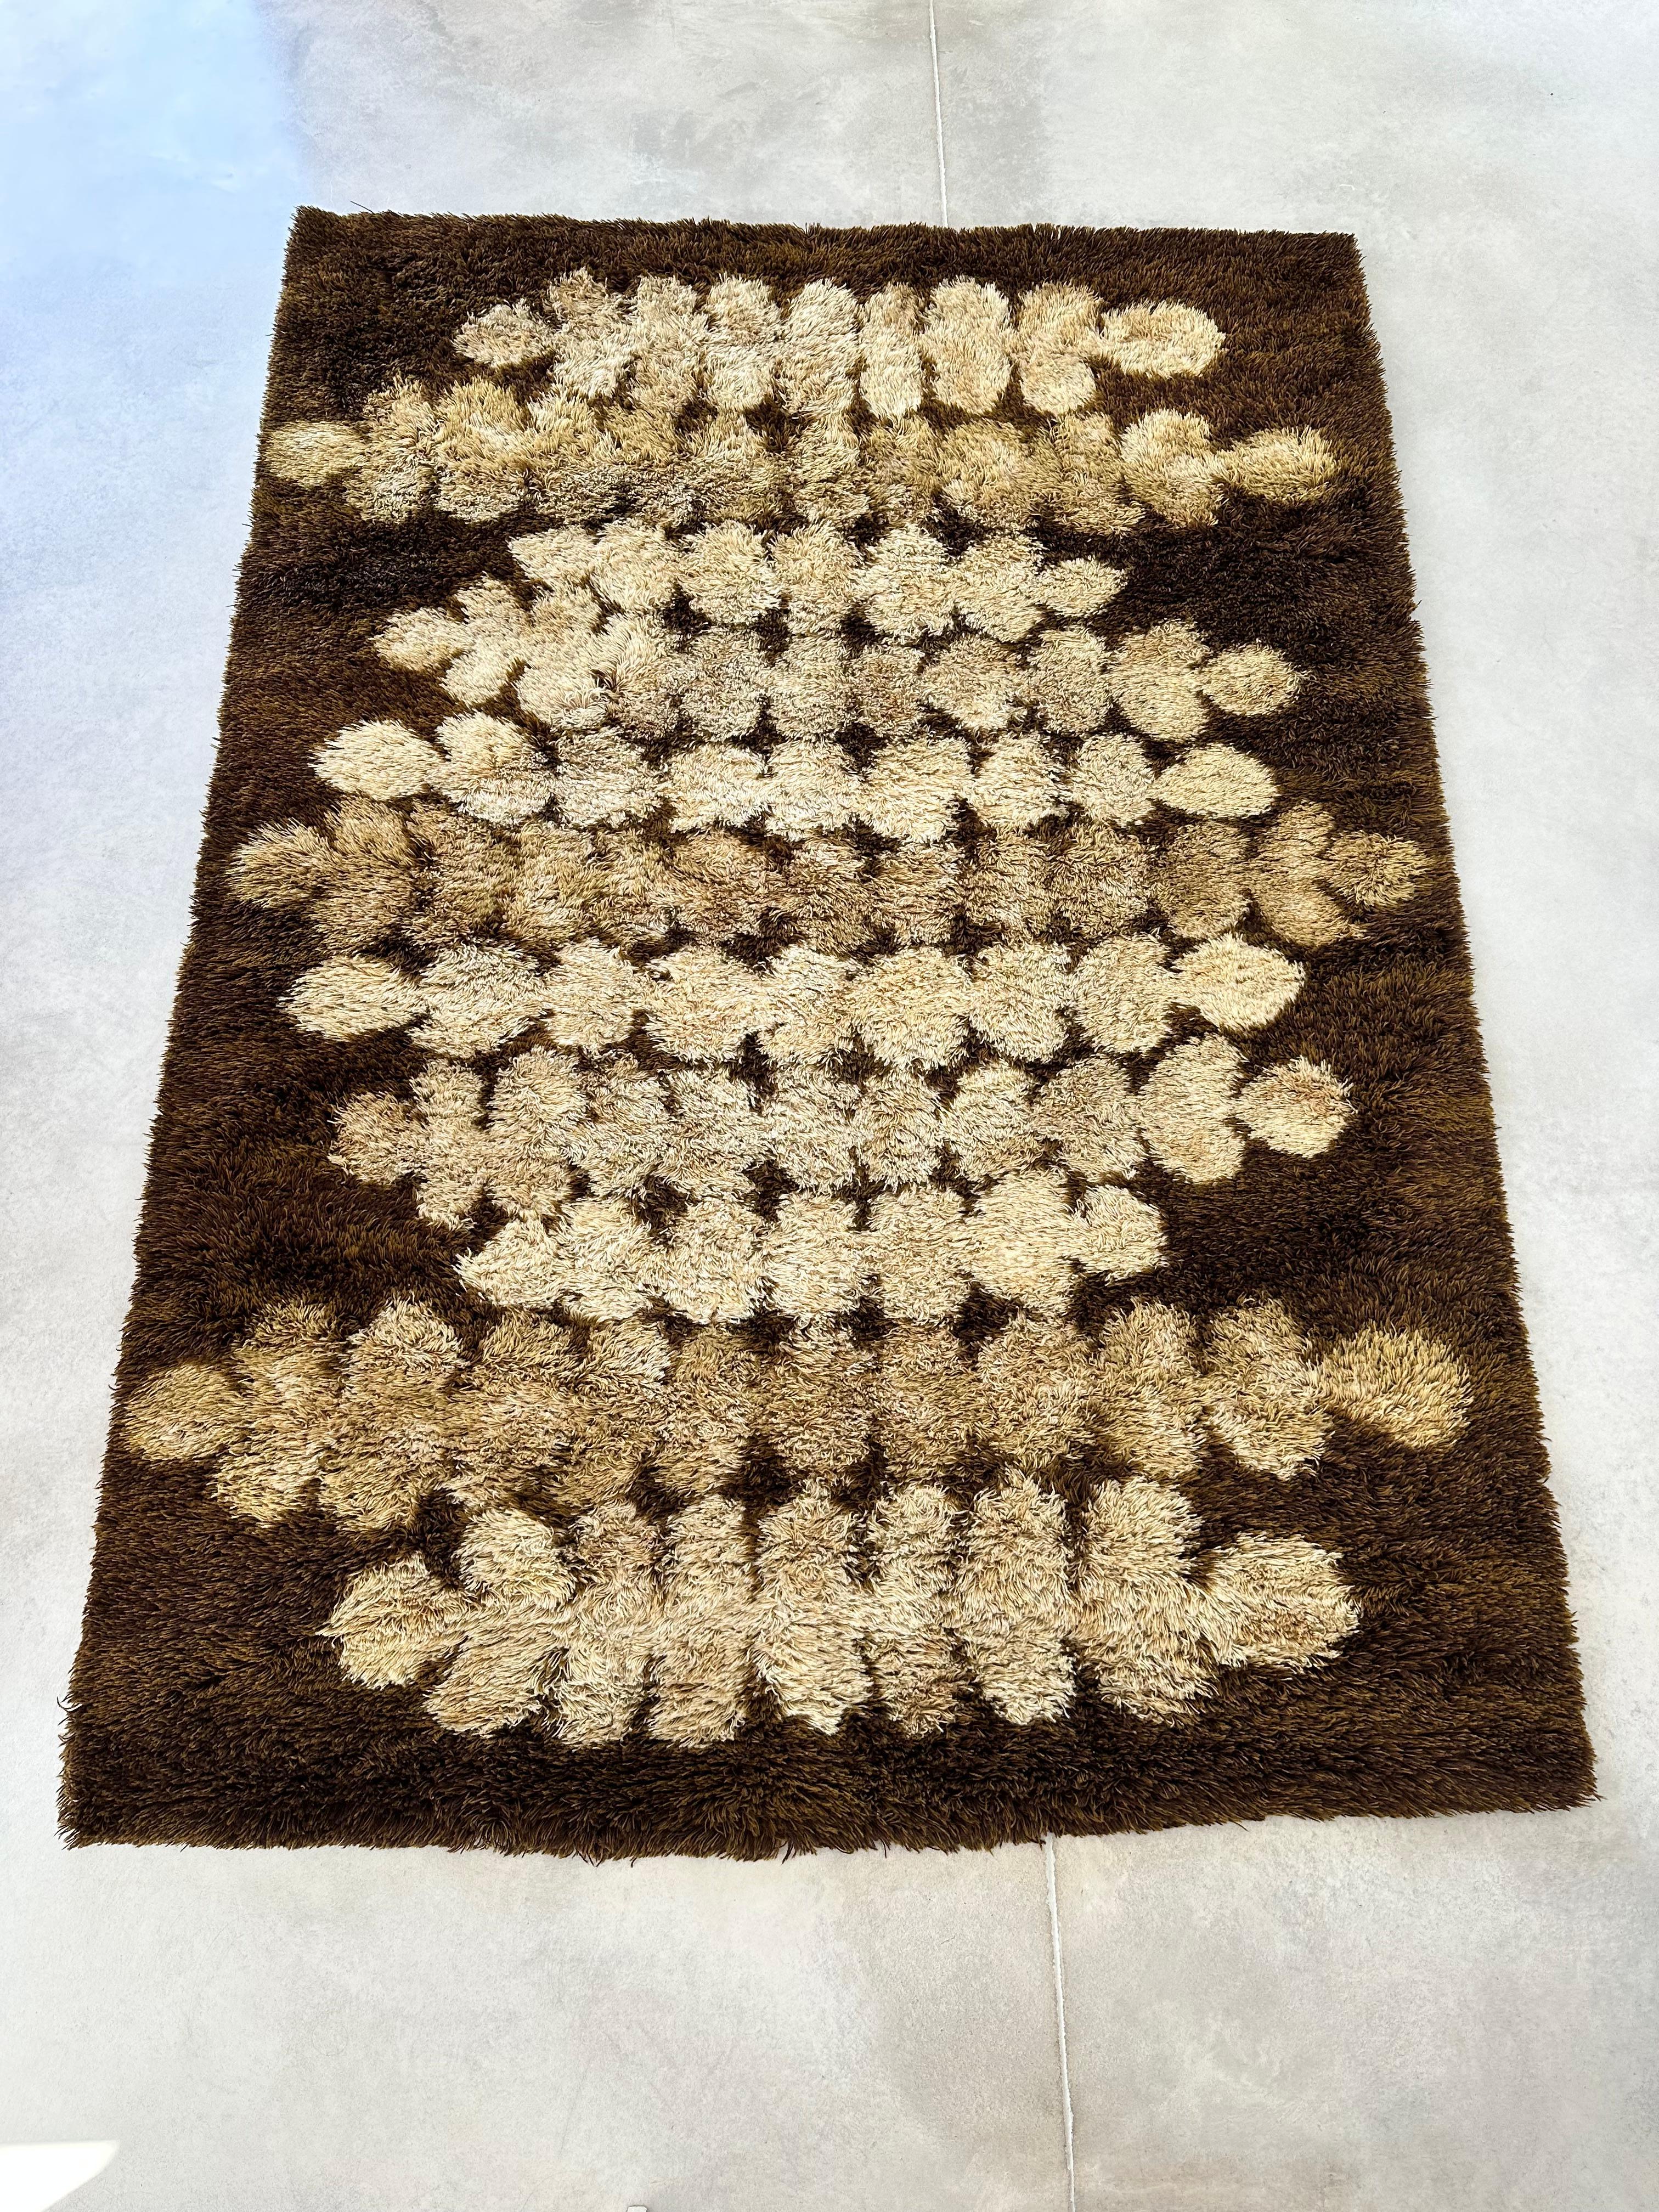 Design Danish Rya rug from the 1970s, 90,5 x 67 inches ( this one is a big size). Made in Denmark. Missing label.

Abstract autumn swirling design with tan, brown, and cream hues.

Good conditions, the carpet has been cleaned (old stains on the